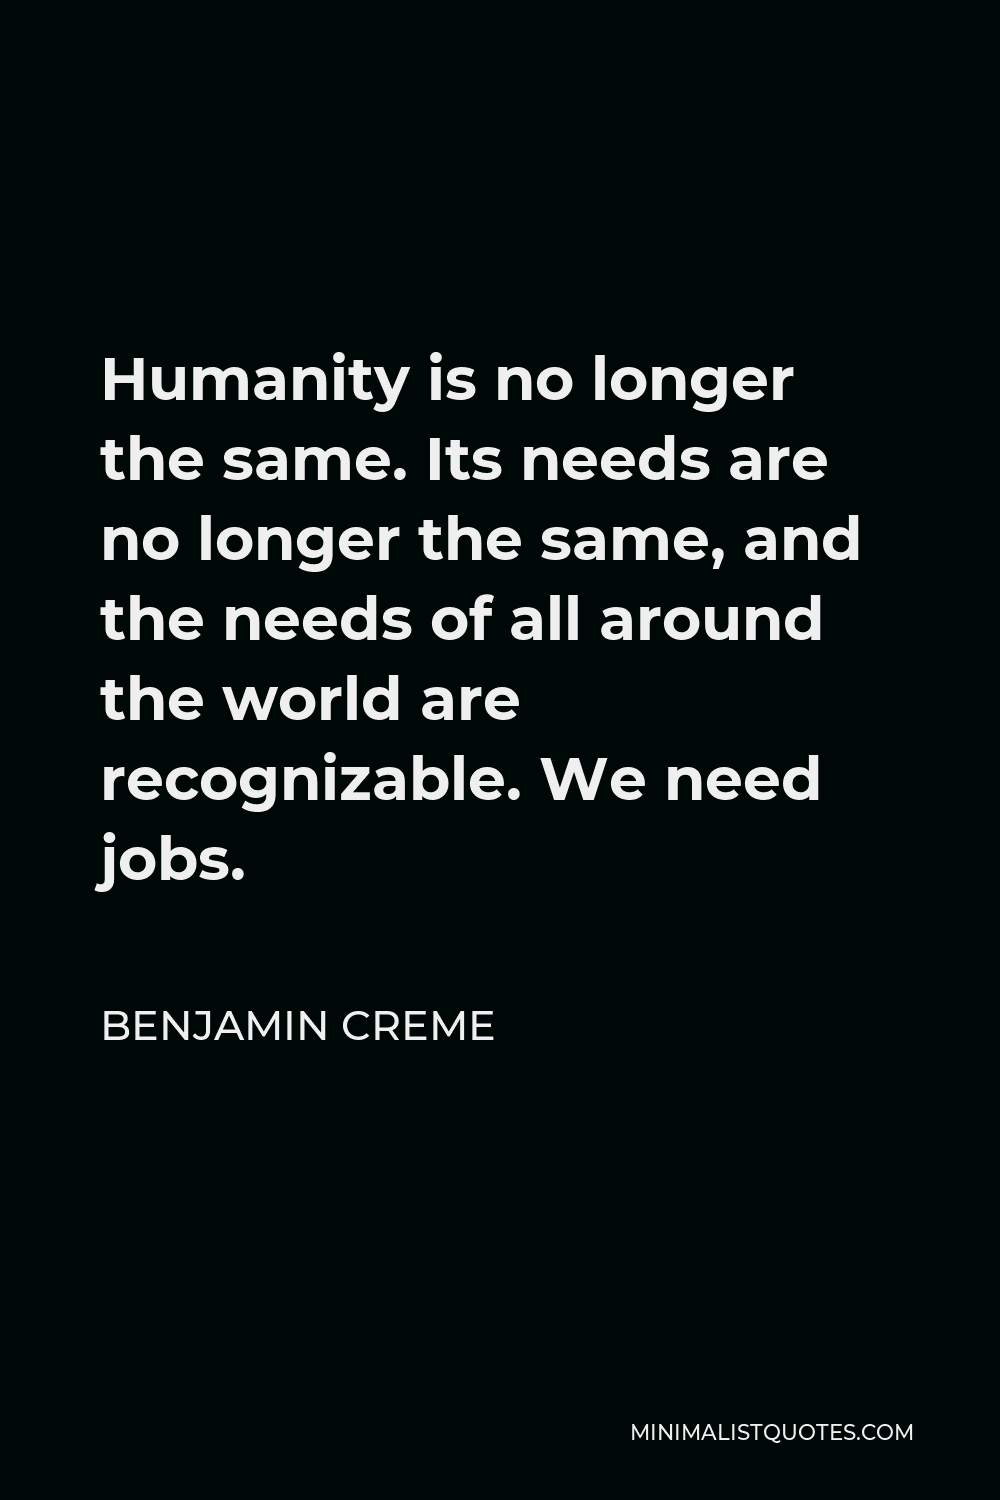 Benjamin Creme Quote - Humanity is no longer the same. Its needs are no longer the same, and the needs of all around the world are recognizable. We need jobs.